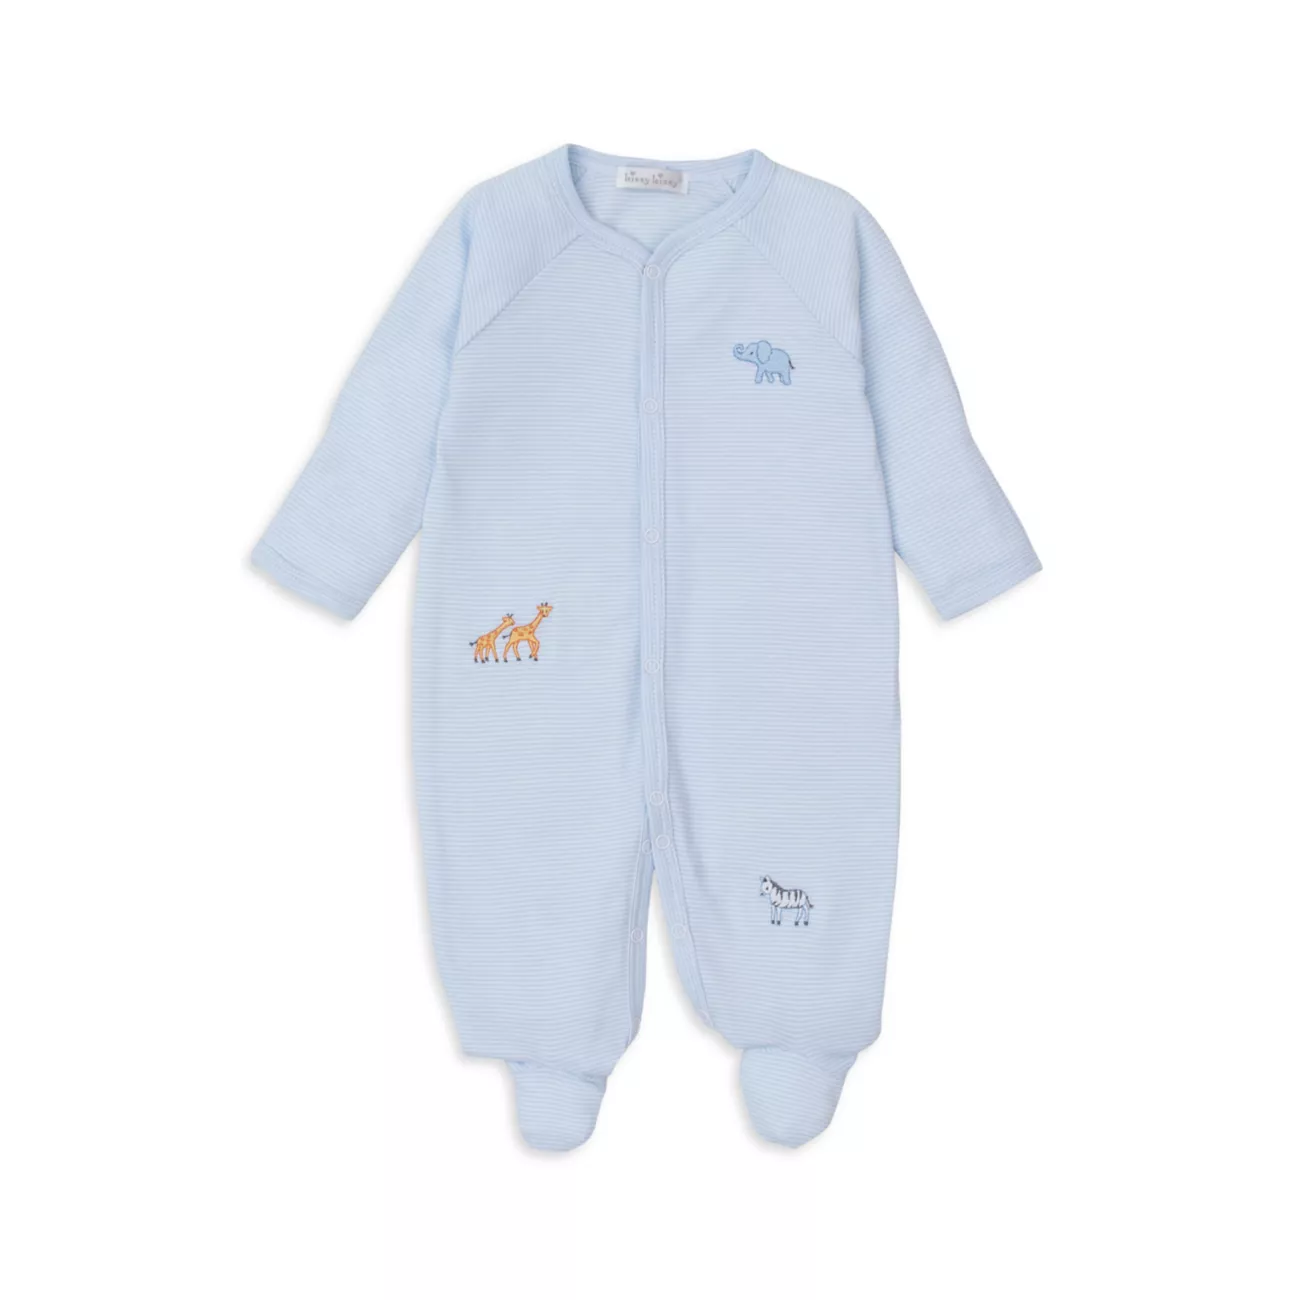 Baby's Embroidered Animal Striped Footie Kissy Kissy